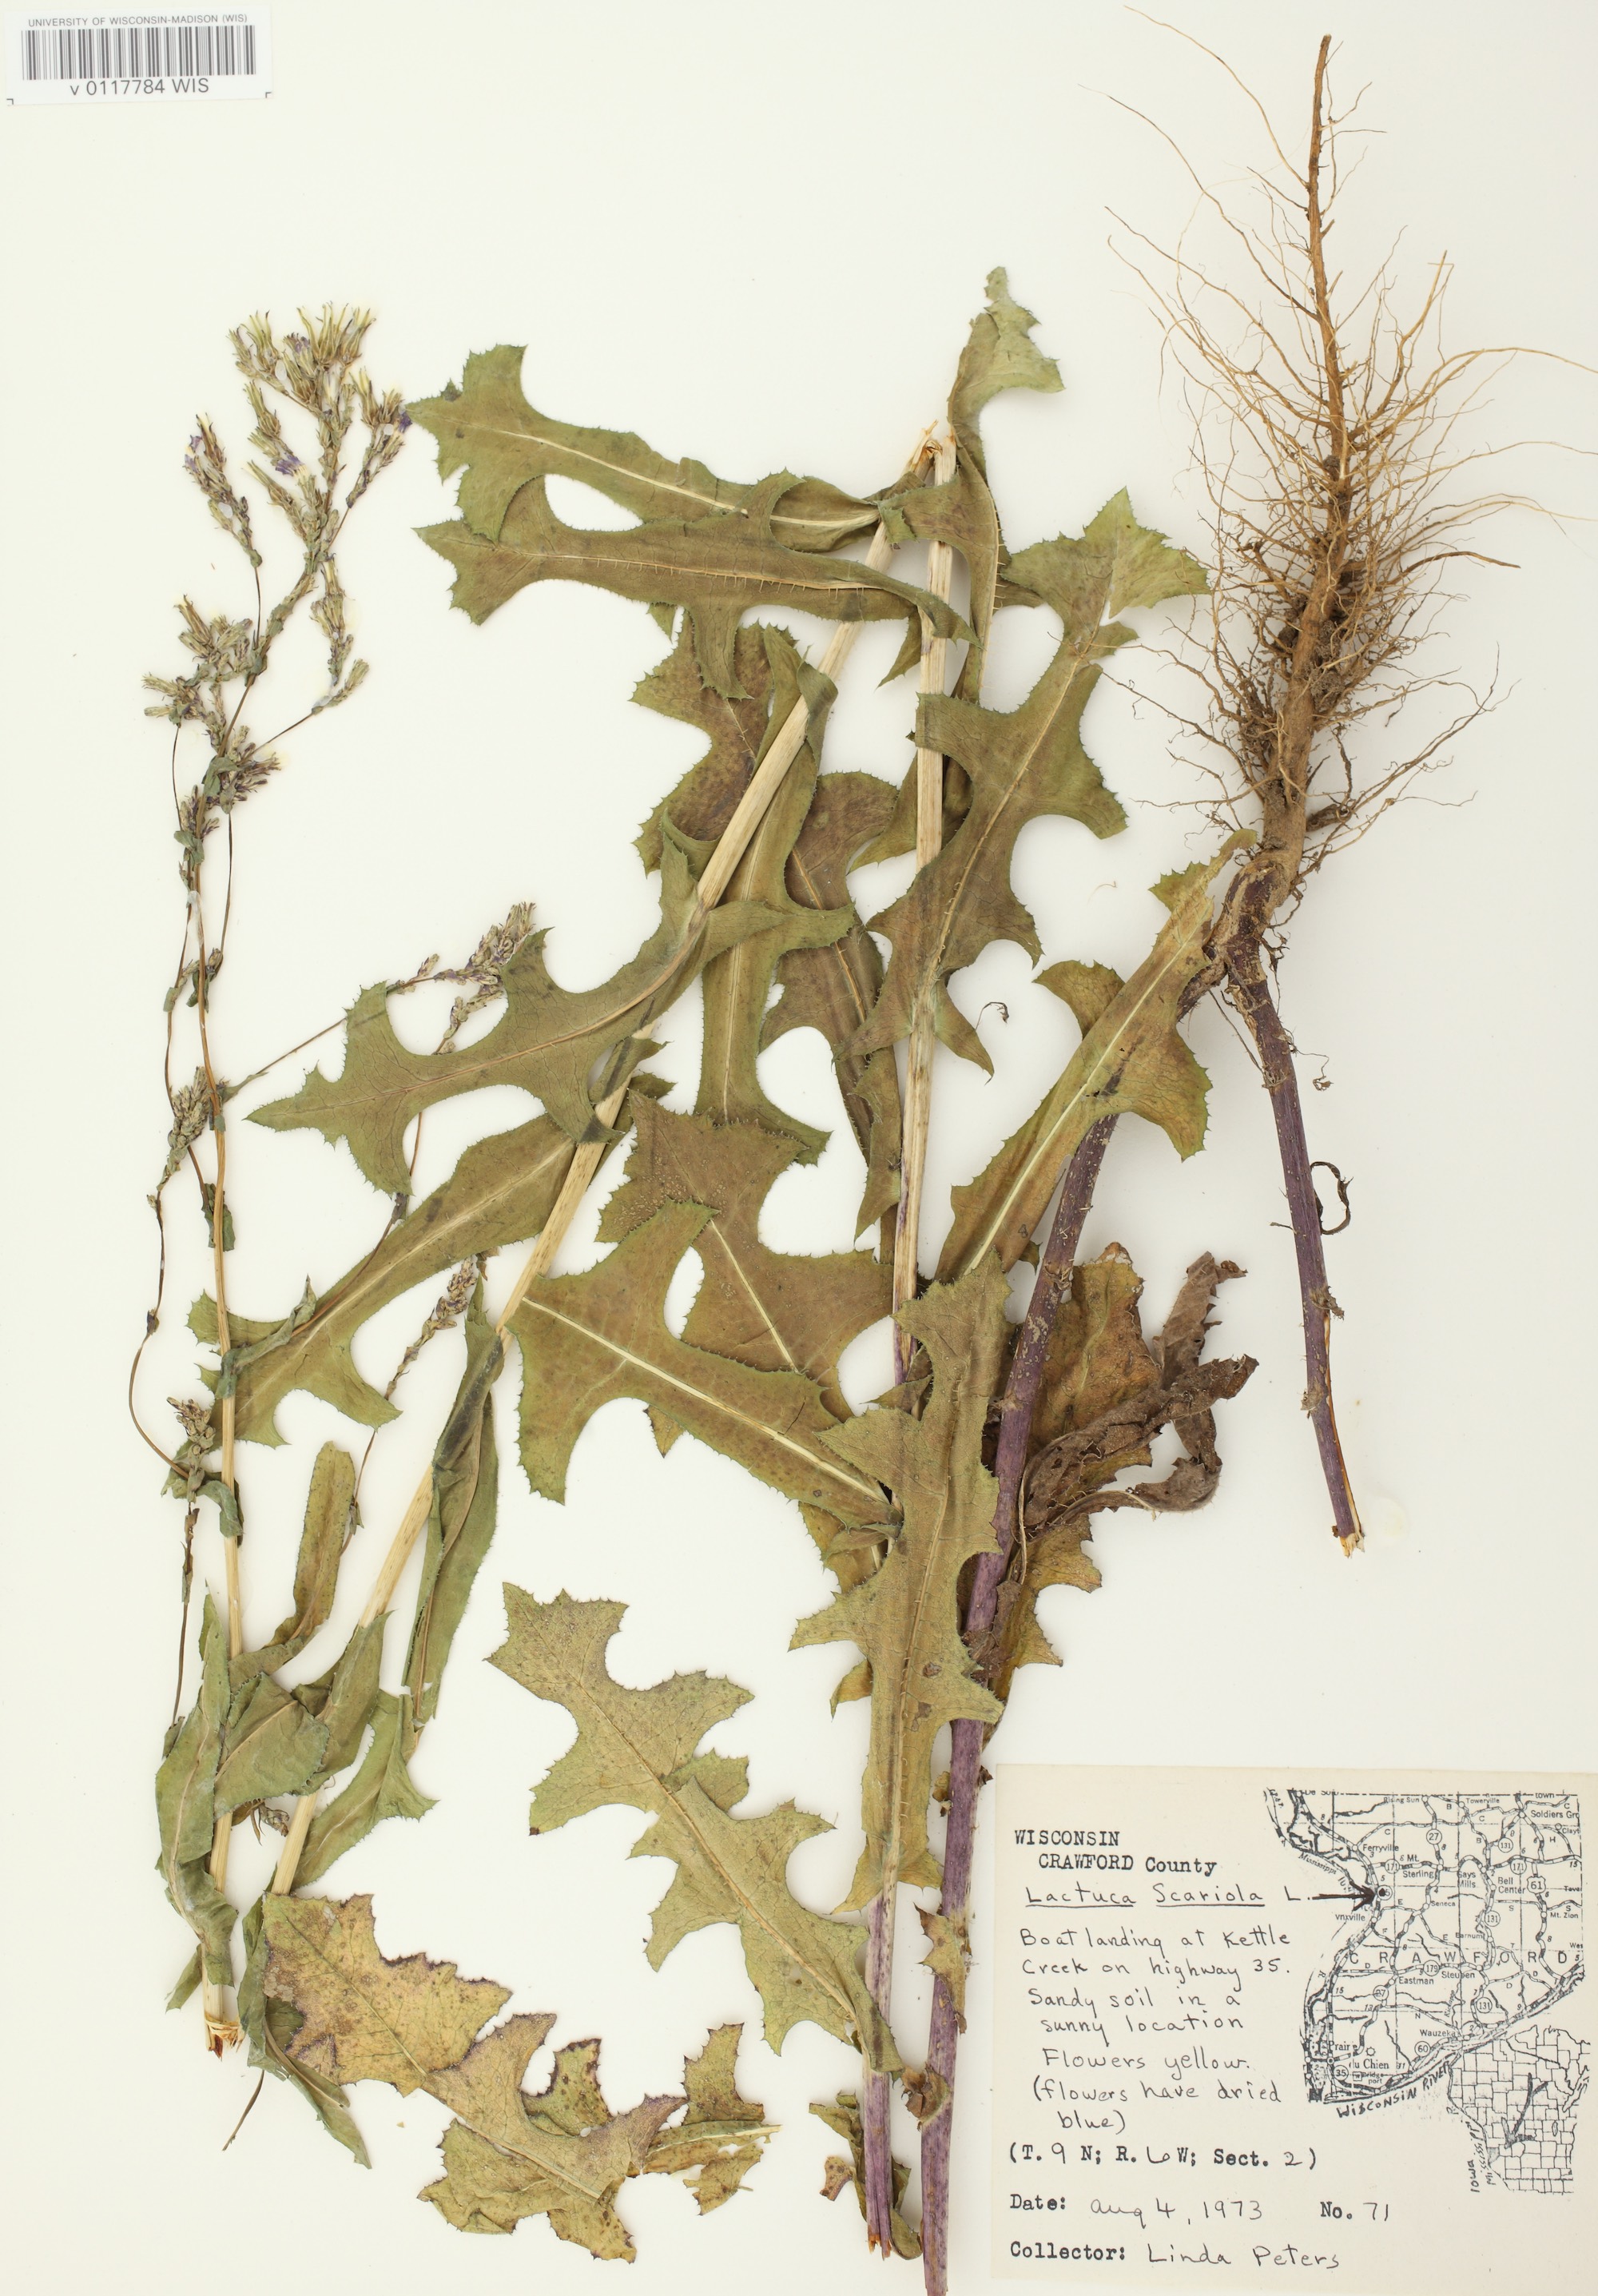 Prickly Lettuce specimen collected at boat landing at Kettle Creek on Highway 35 in Crawford County, Wisconsin on August 4, 1973.